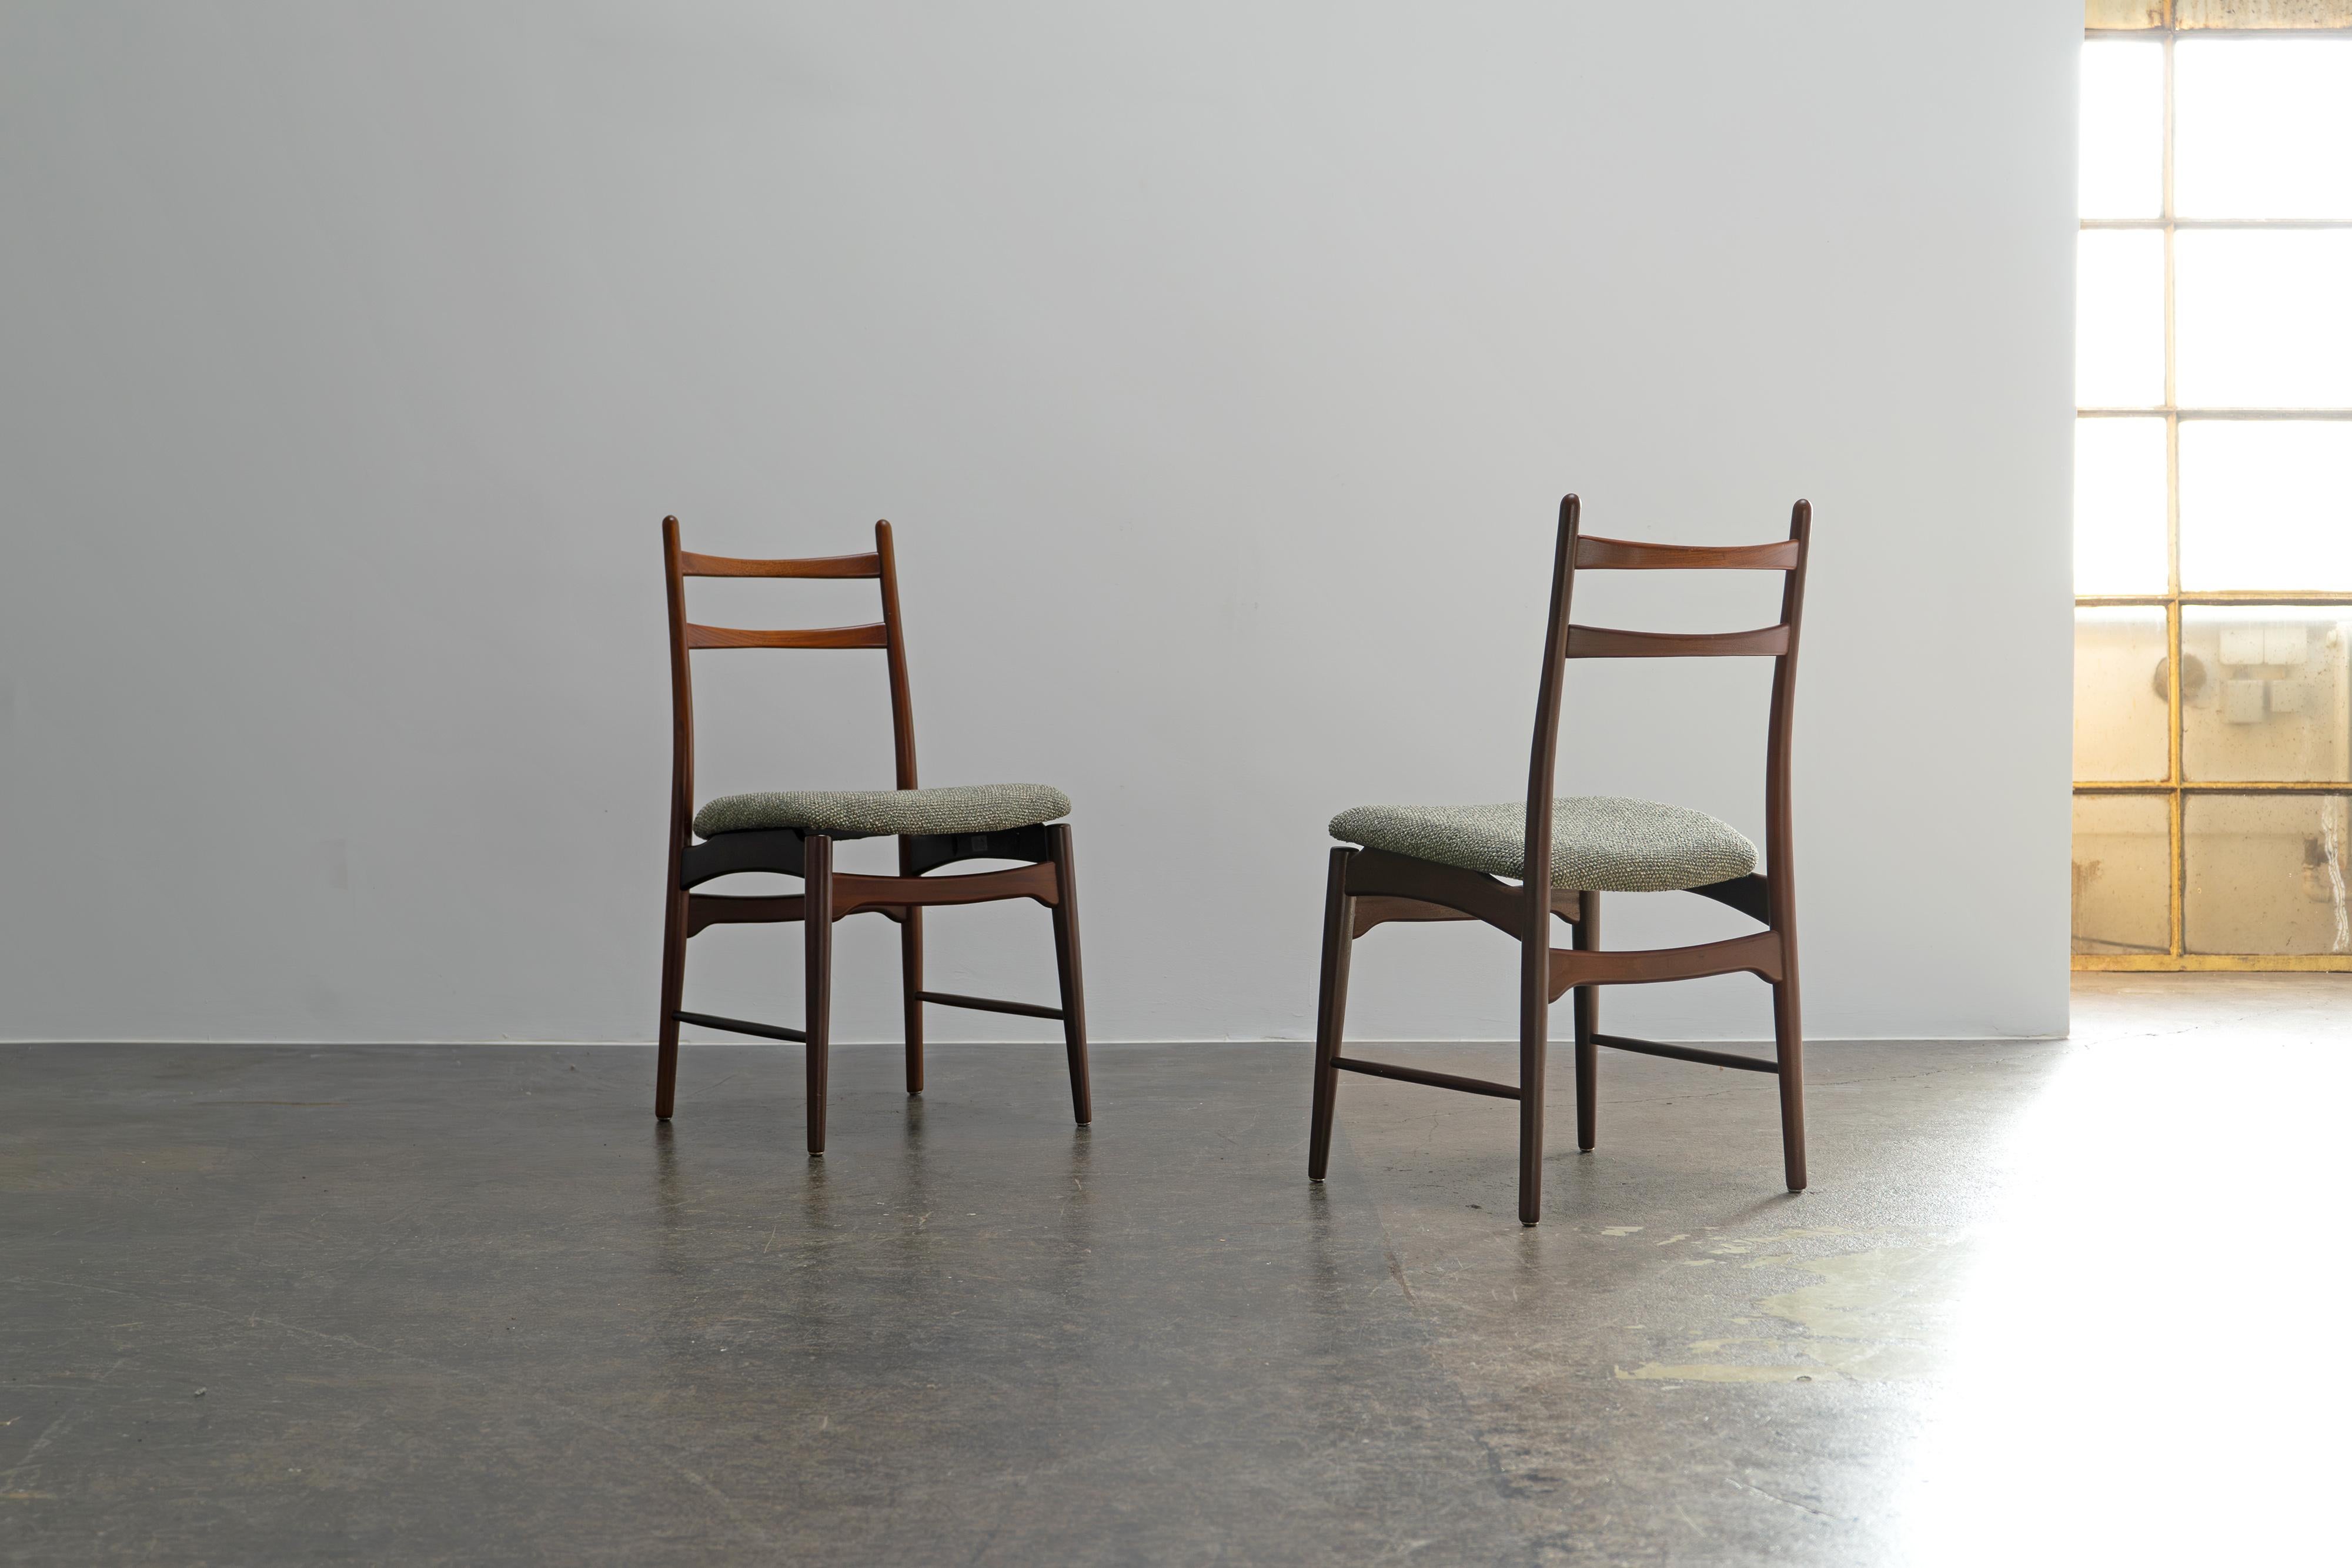 Set of Twelve Mid-Century Teak Dining Chairs by Wilkhahn Germany, 1958 For Sale 1